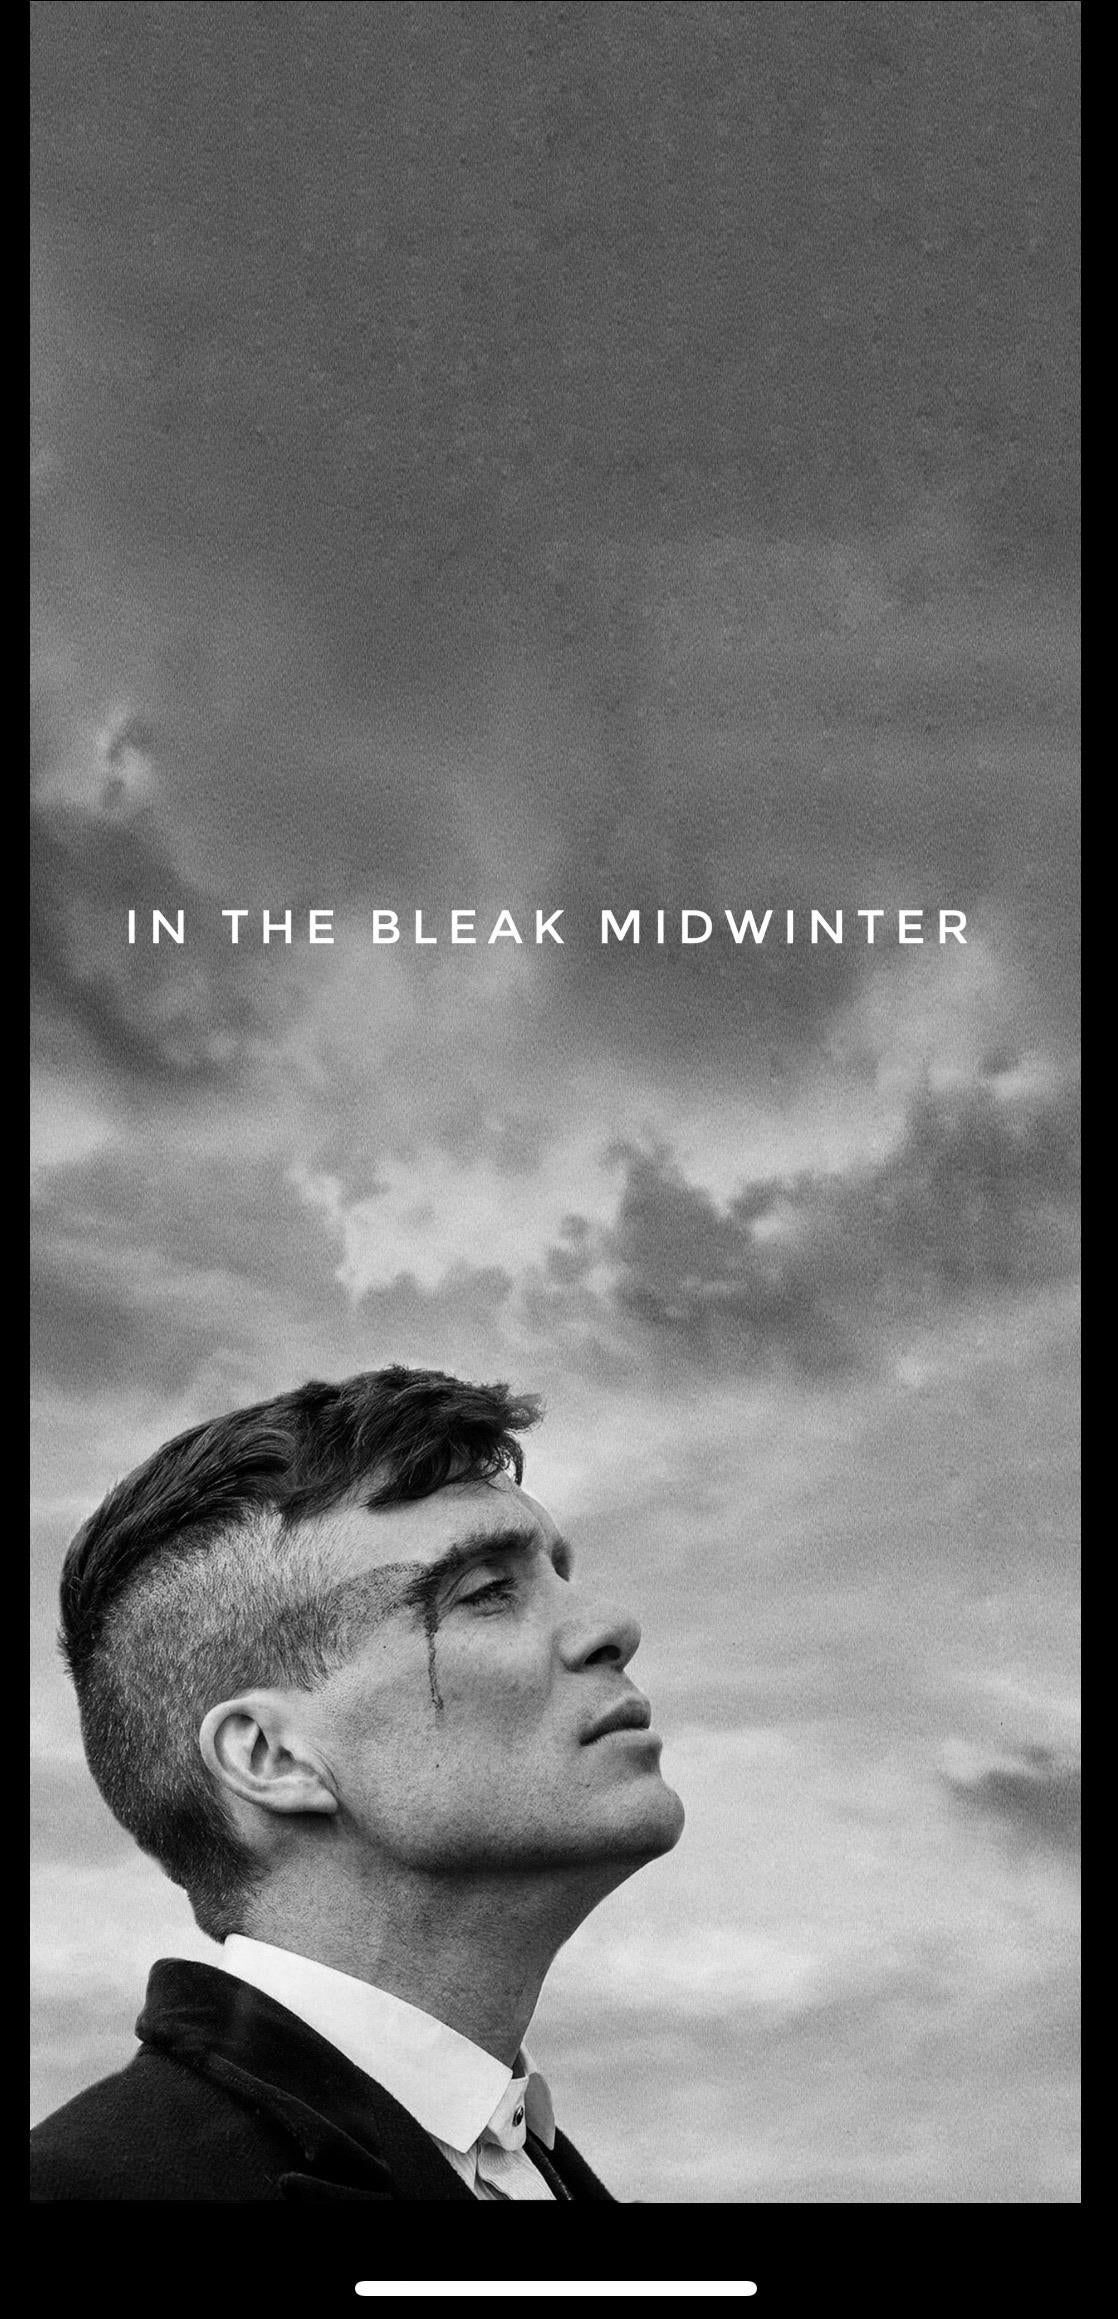 Just made this my background on my phone, feel free to use: PeakyBlinders